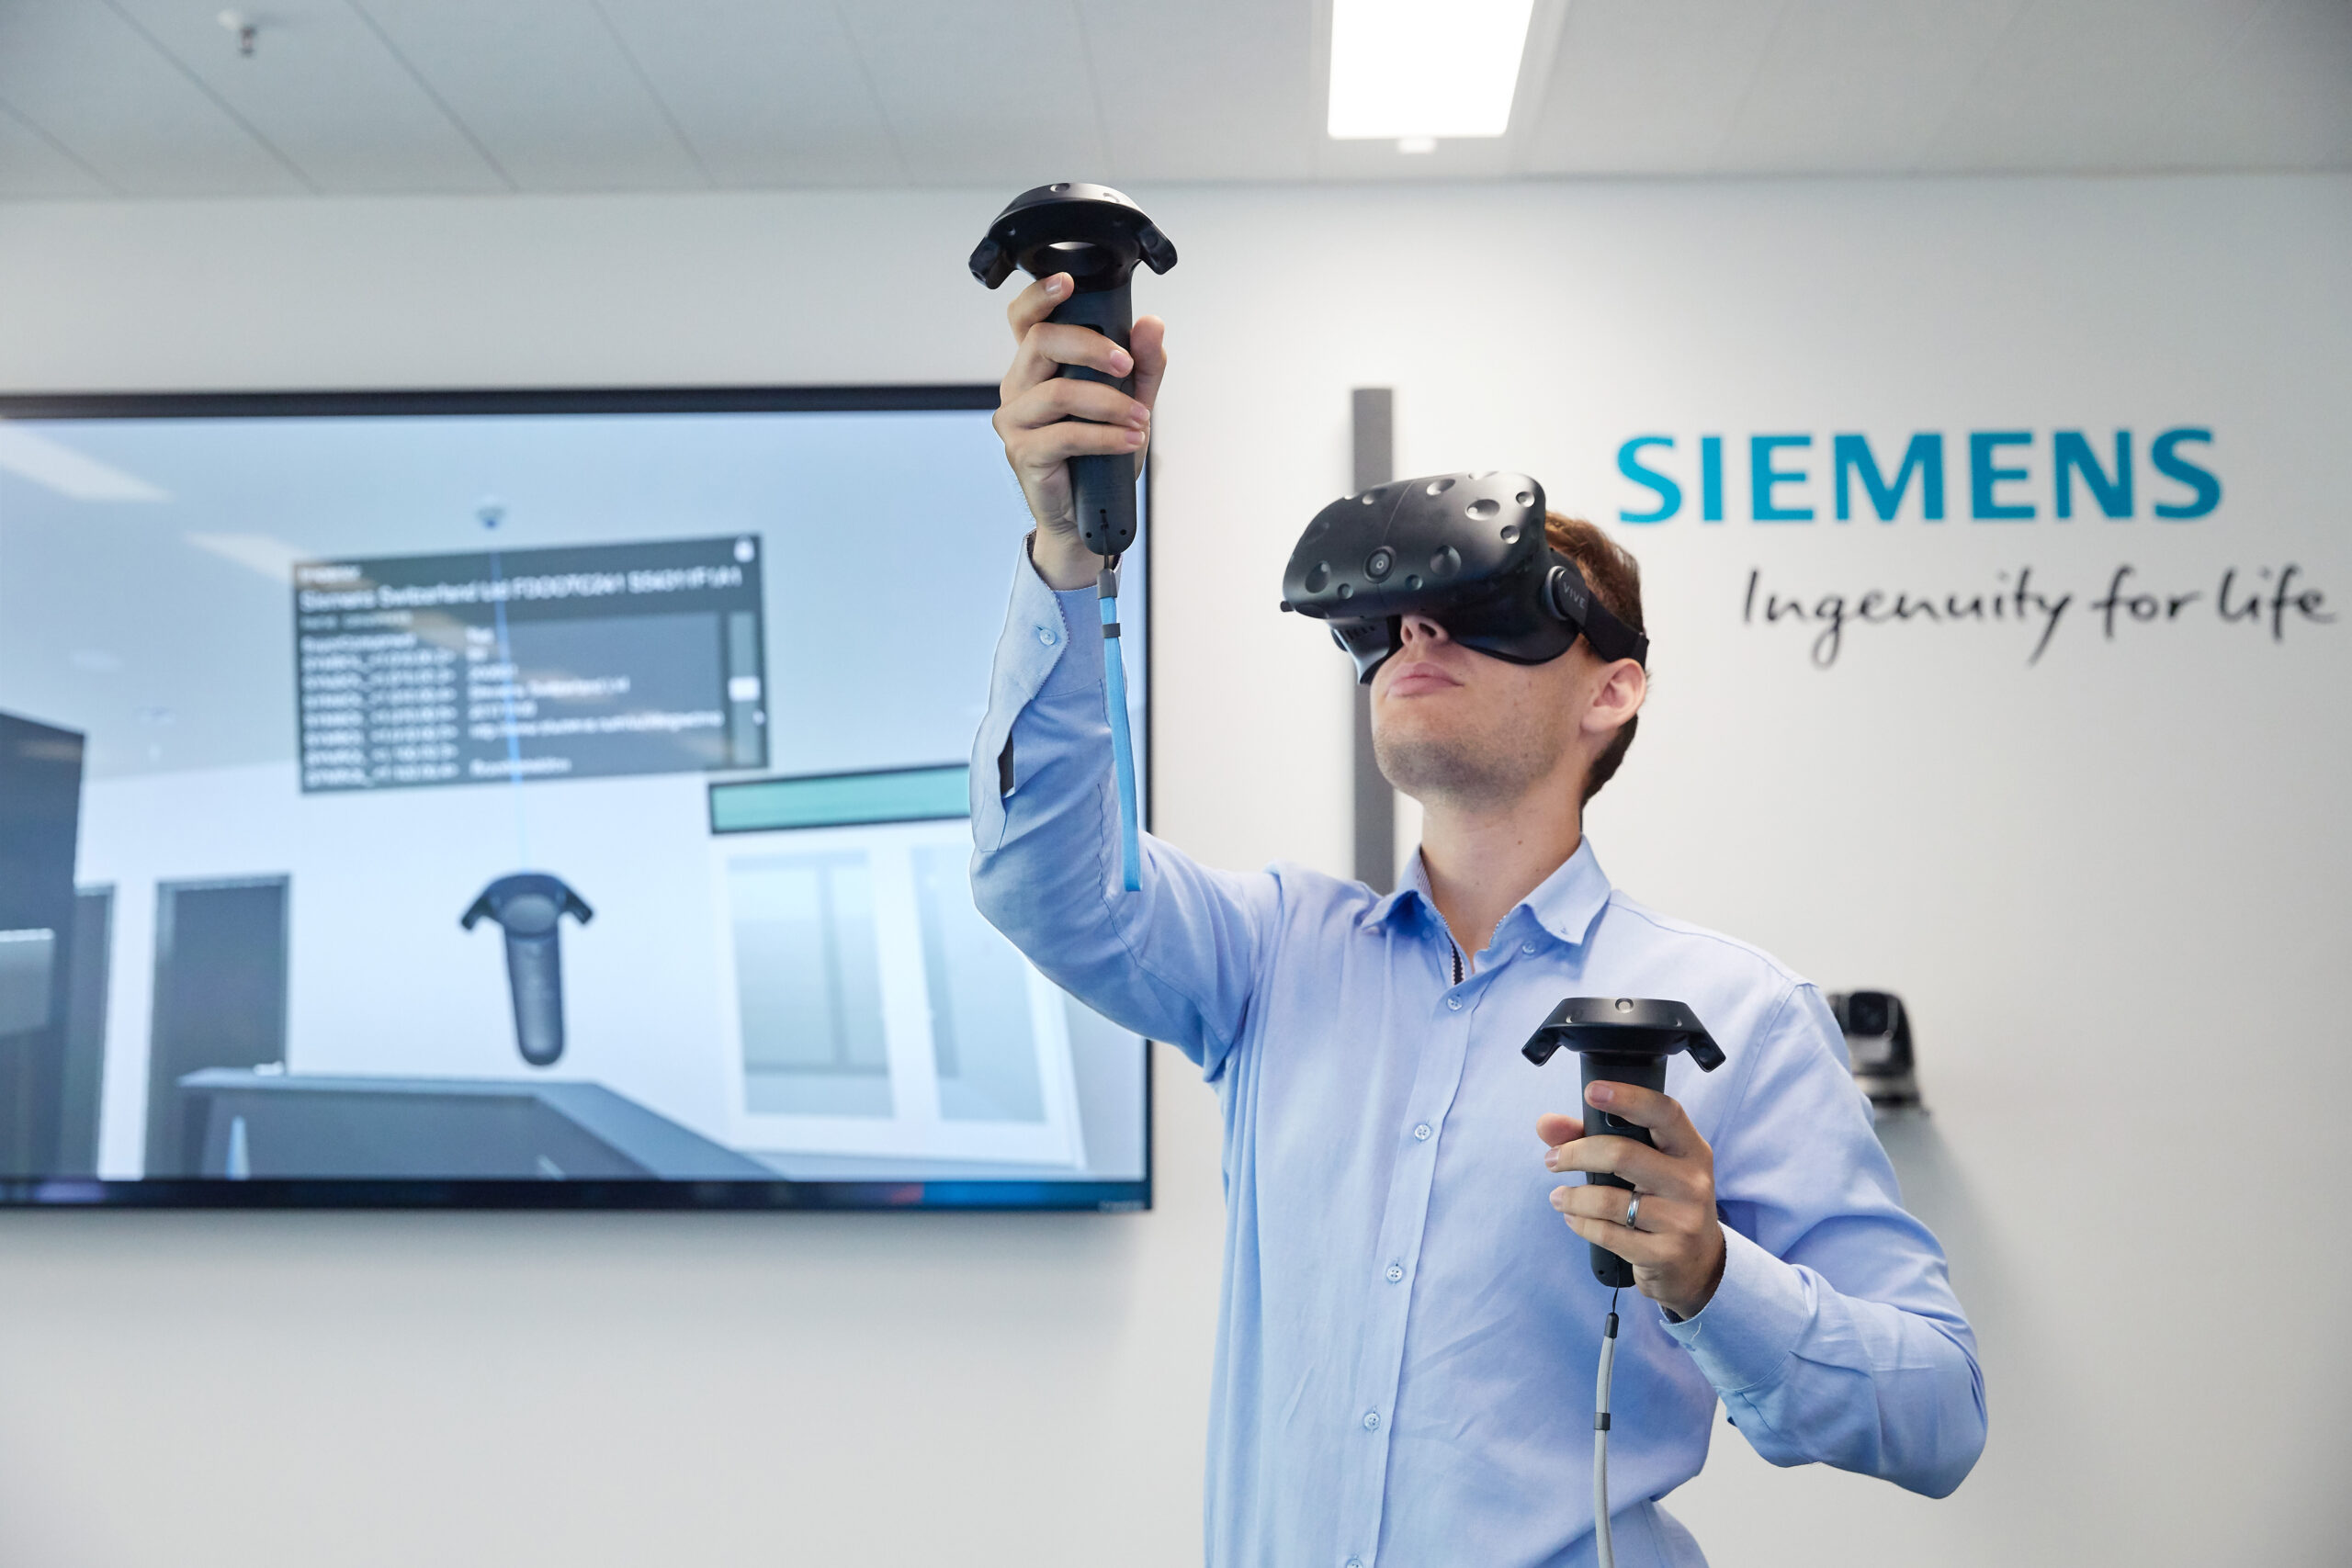 Virtual reality and augmented reality help automotive engineers collaborate in virtual spaces.